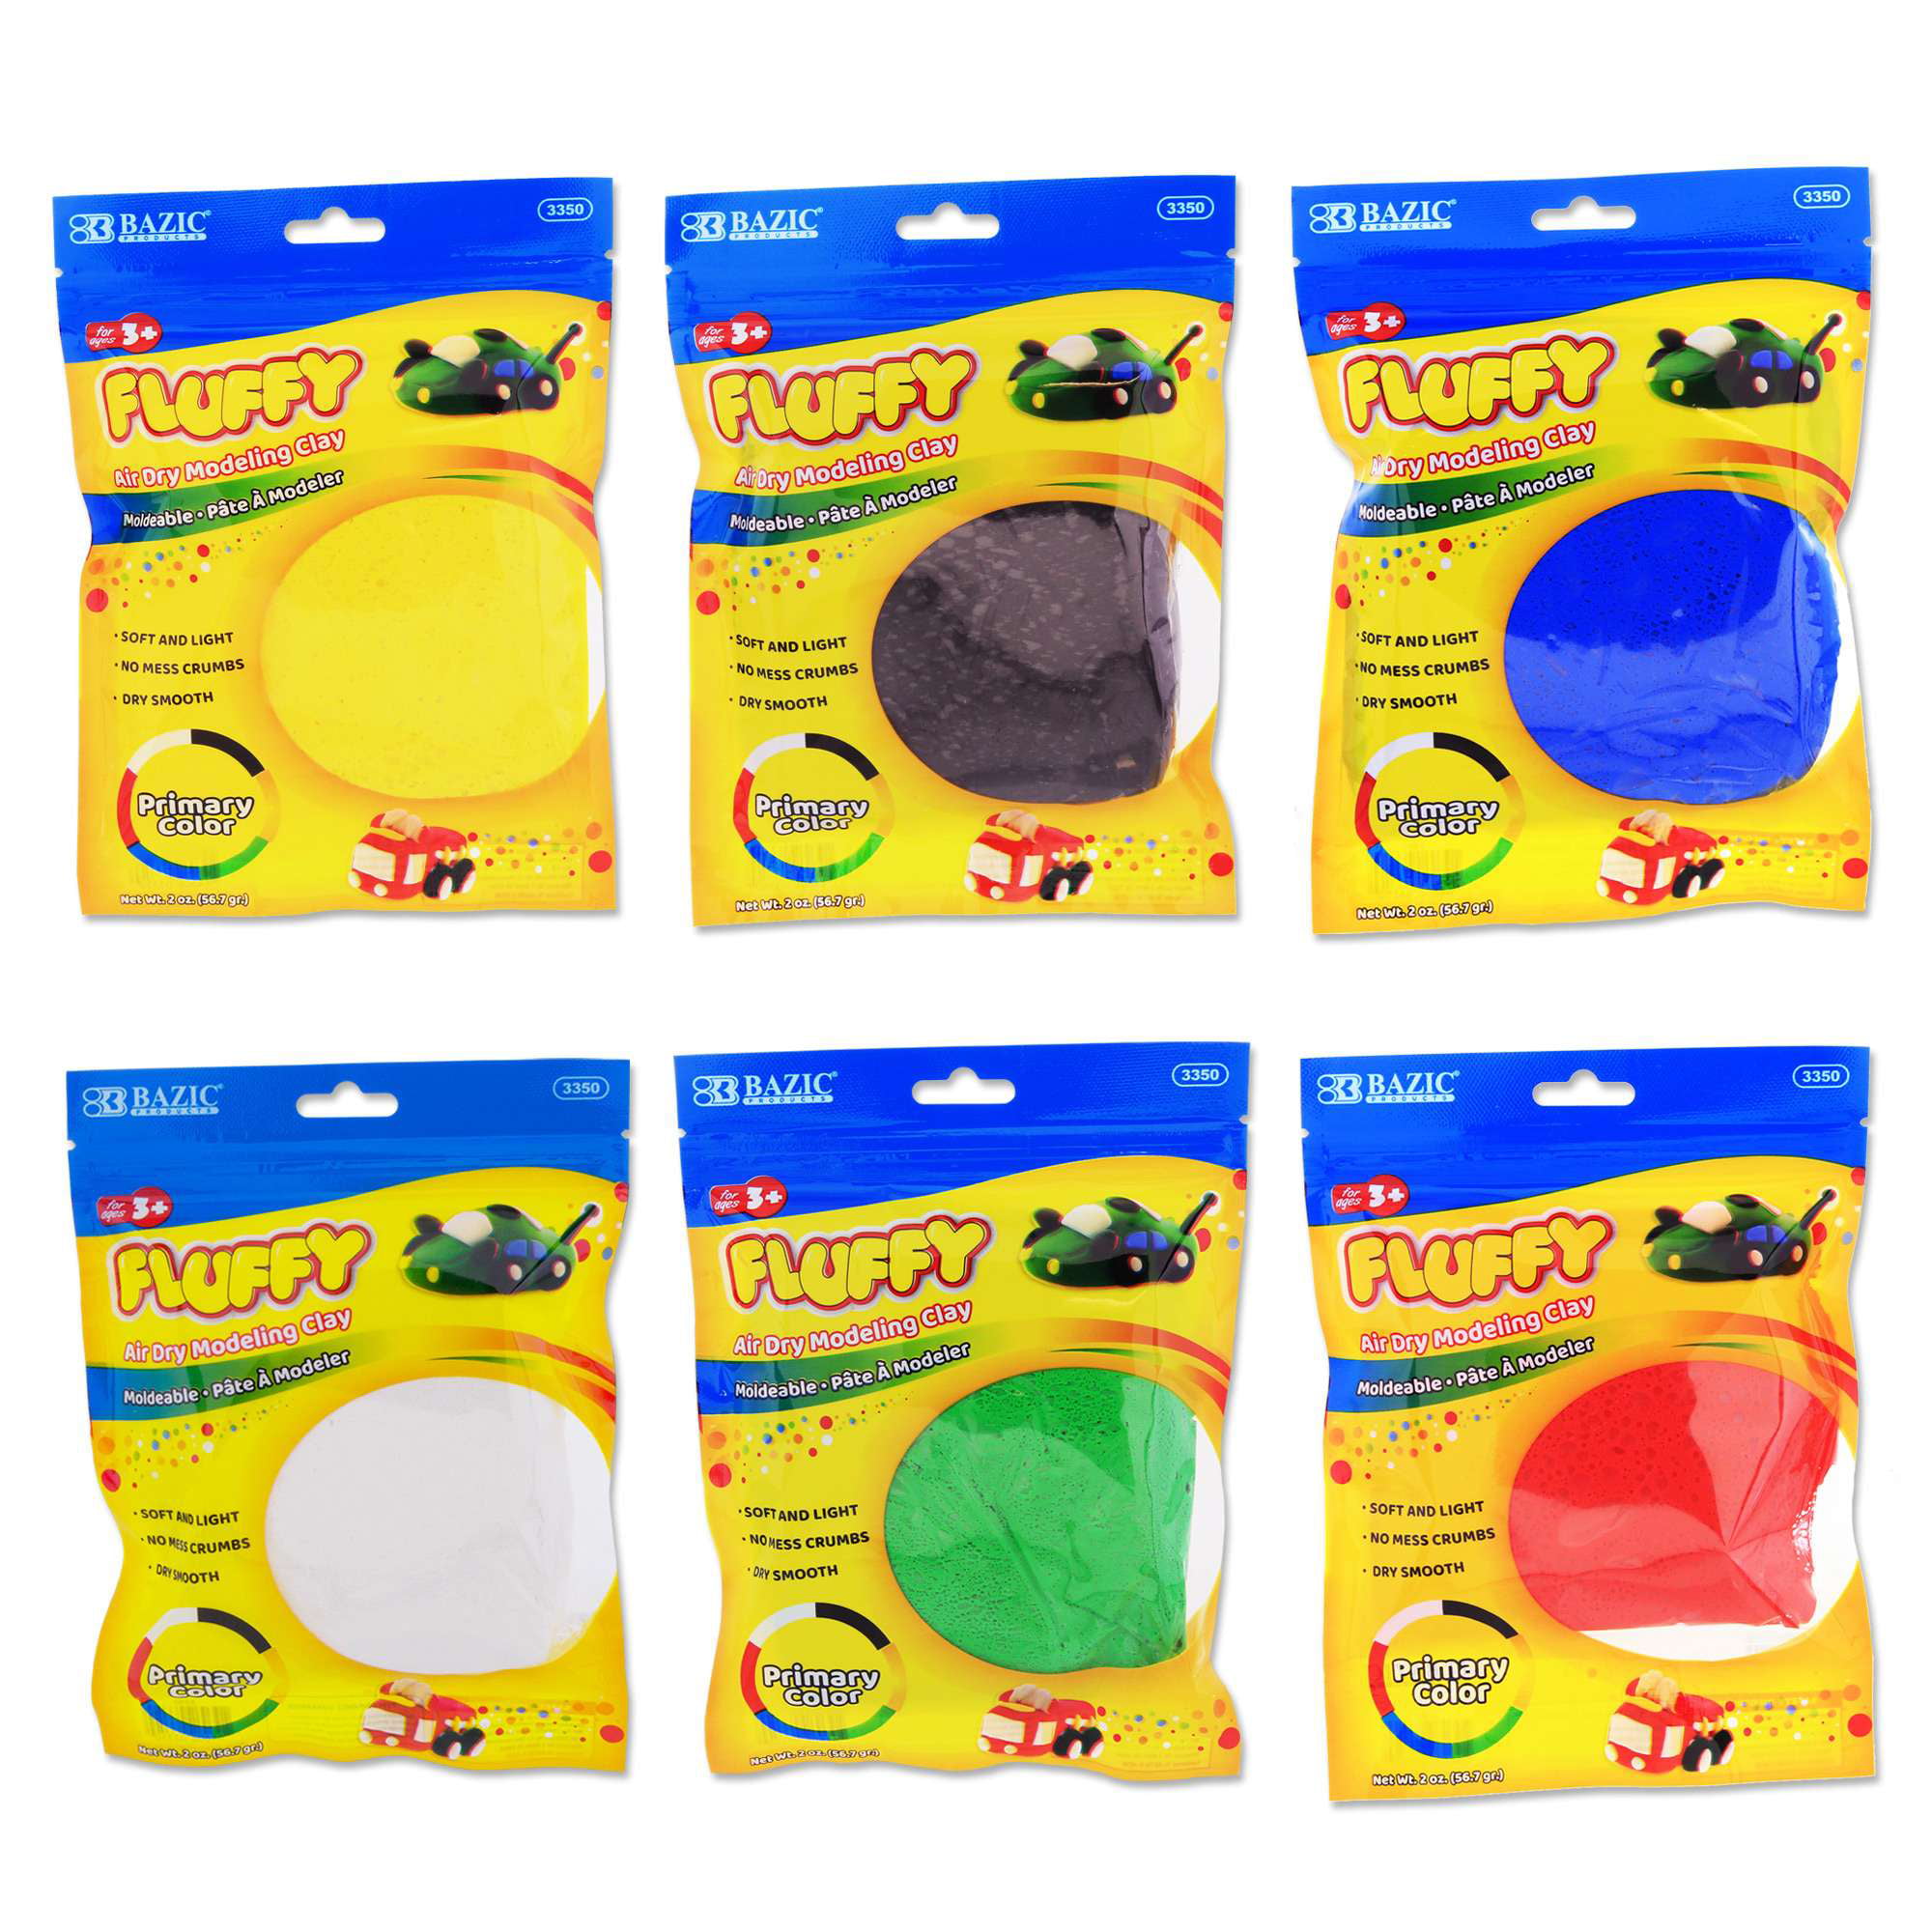 3 Pks of Plasticine Color Play Pack No Dry Modeling Material 